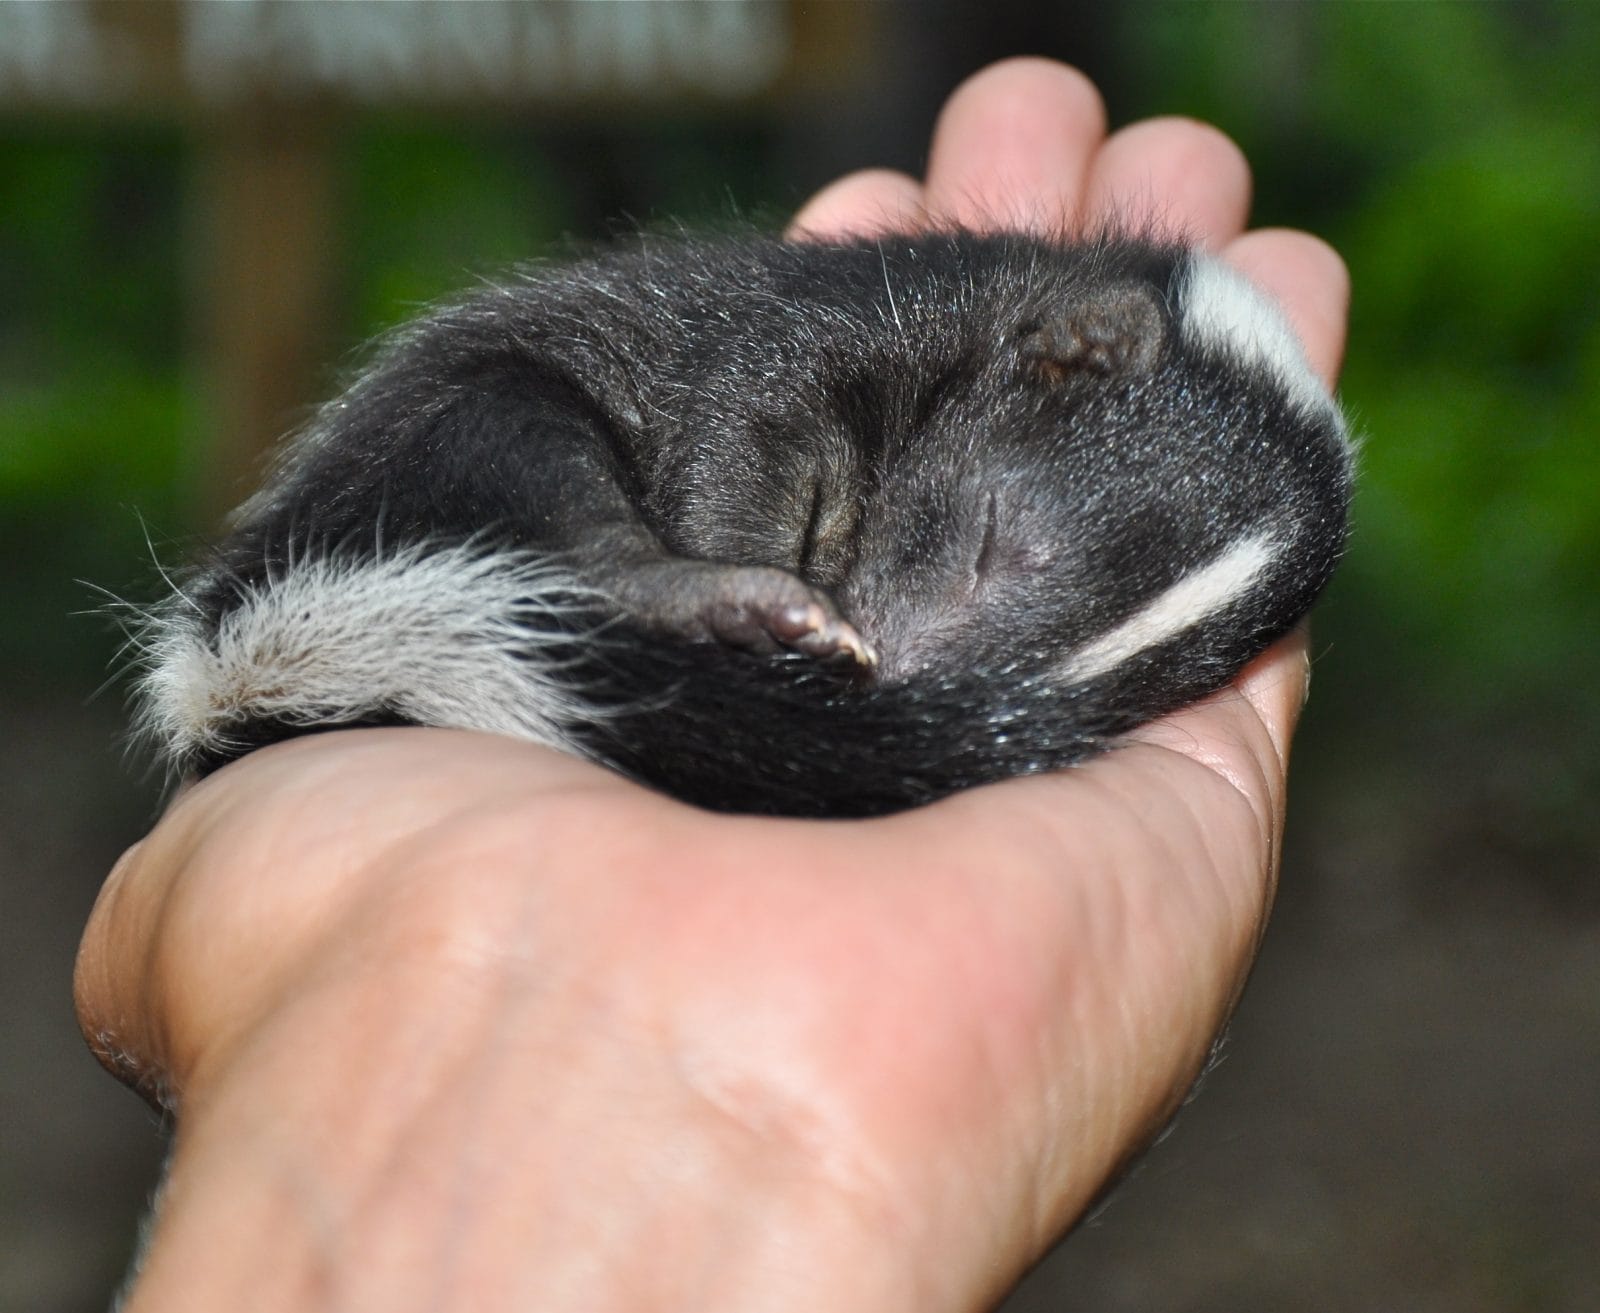 tiny baby skunk in the palm of a hand